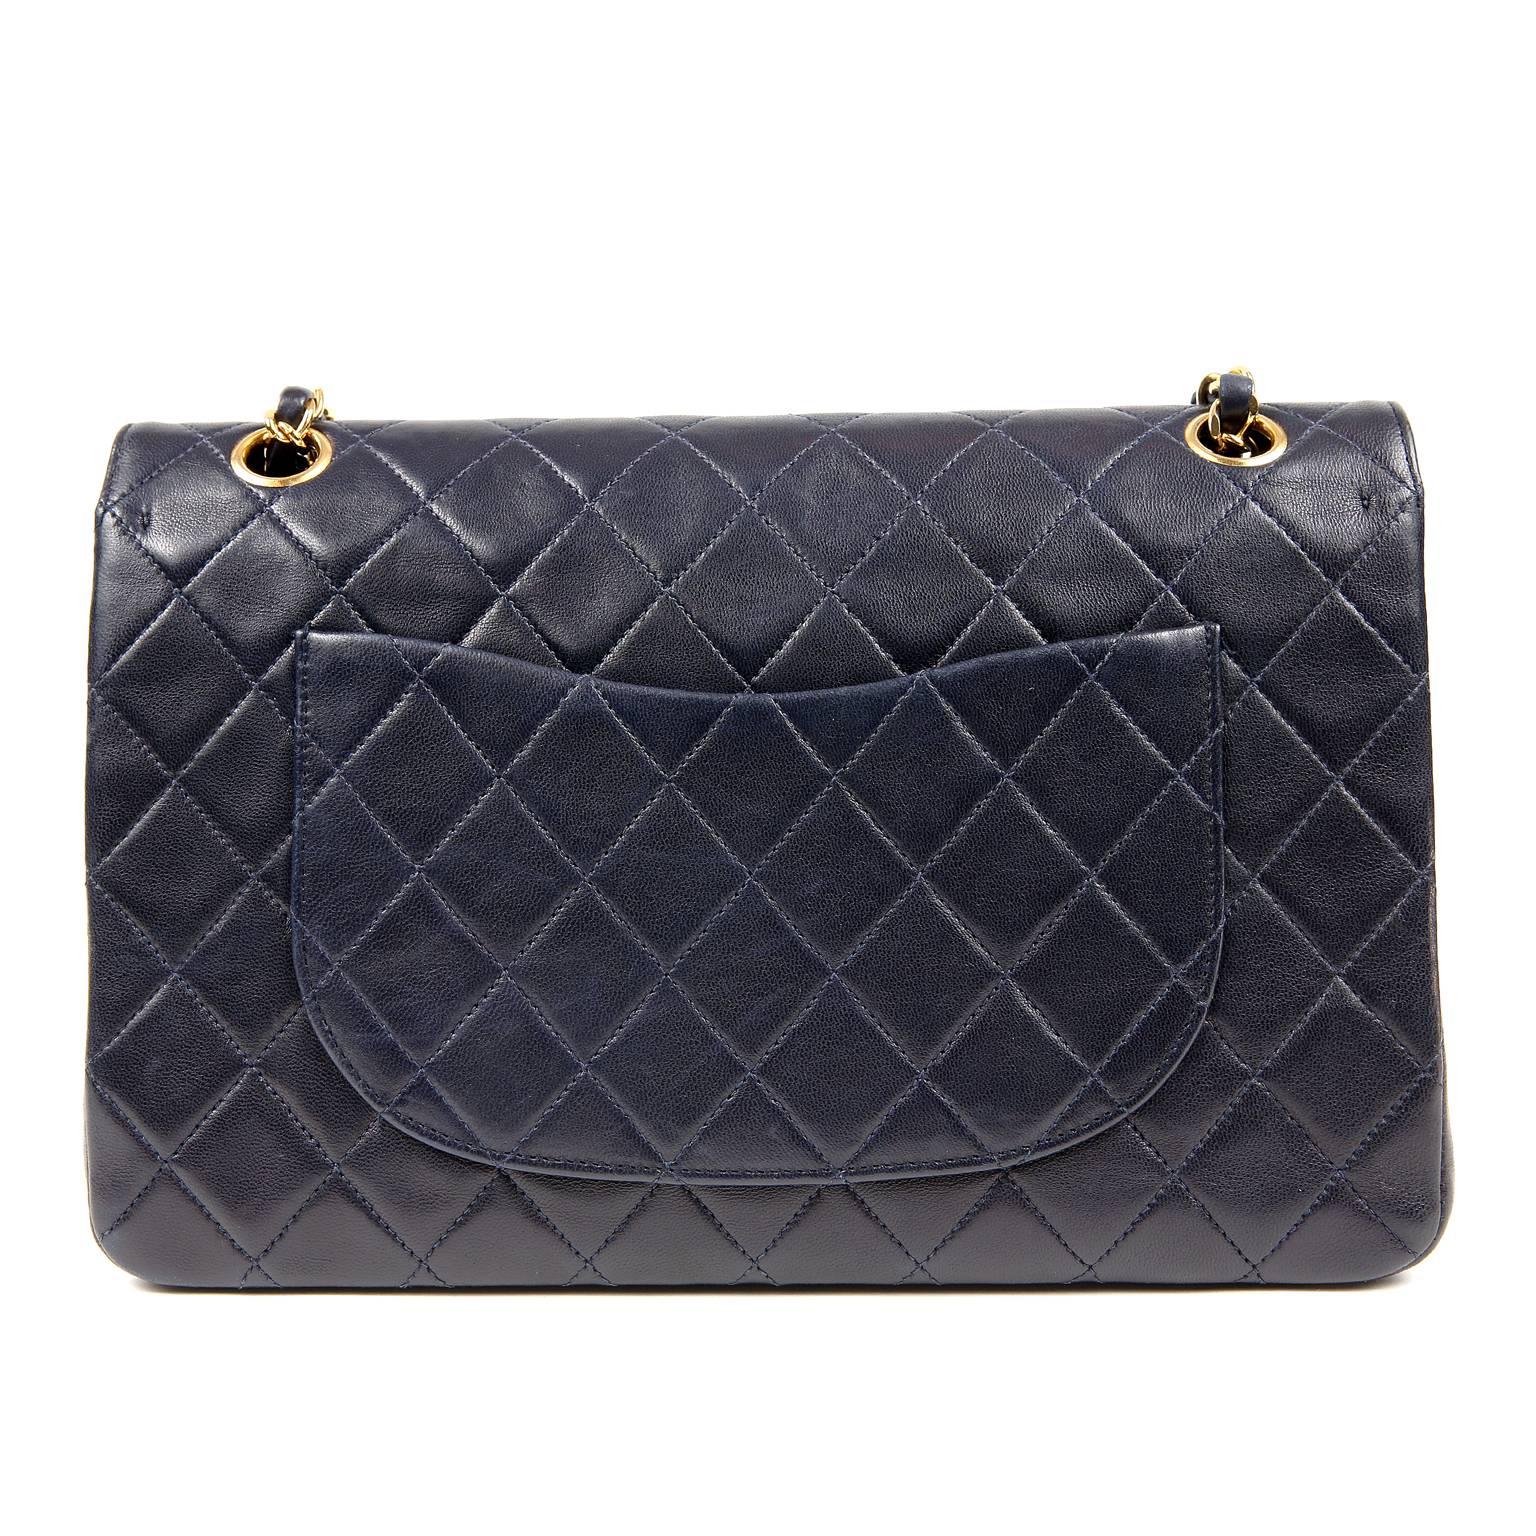 Chanel Navy Lambskin Double Flap Classic- Excellent Condition
 The regal shade of blue pairs brilliantly with gold hardware; a truly classic combination. 
Navy blue lambskin is quilted in signature Chanel diamond pattern.  Gold interlocking CC twist